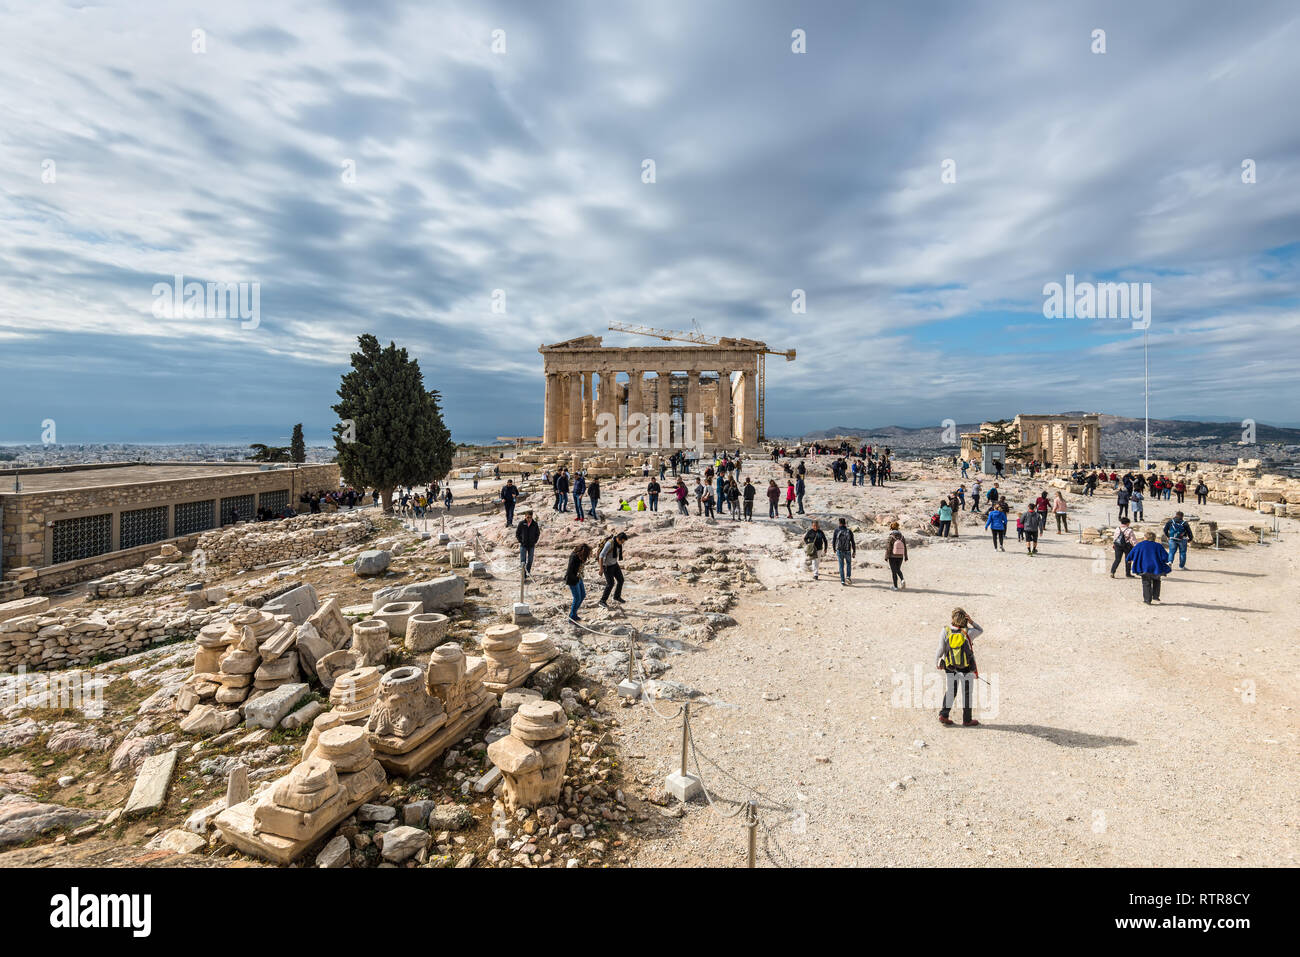 Athens, Greece - November 1, 2017: Many tourists visiting ancient temple Parthenon on Acropolis. Acropolis of Athens is an ancient citadel located on  Stock Photo